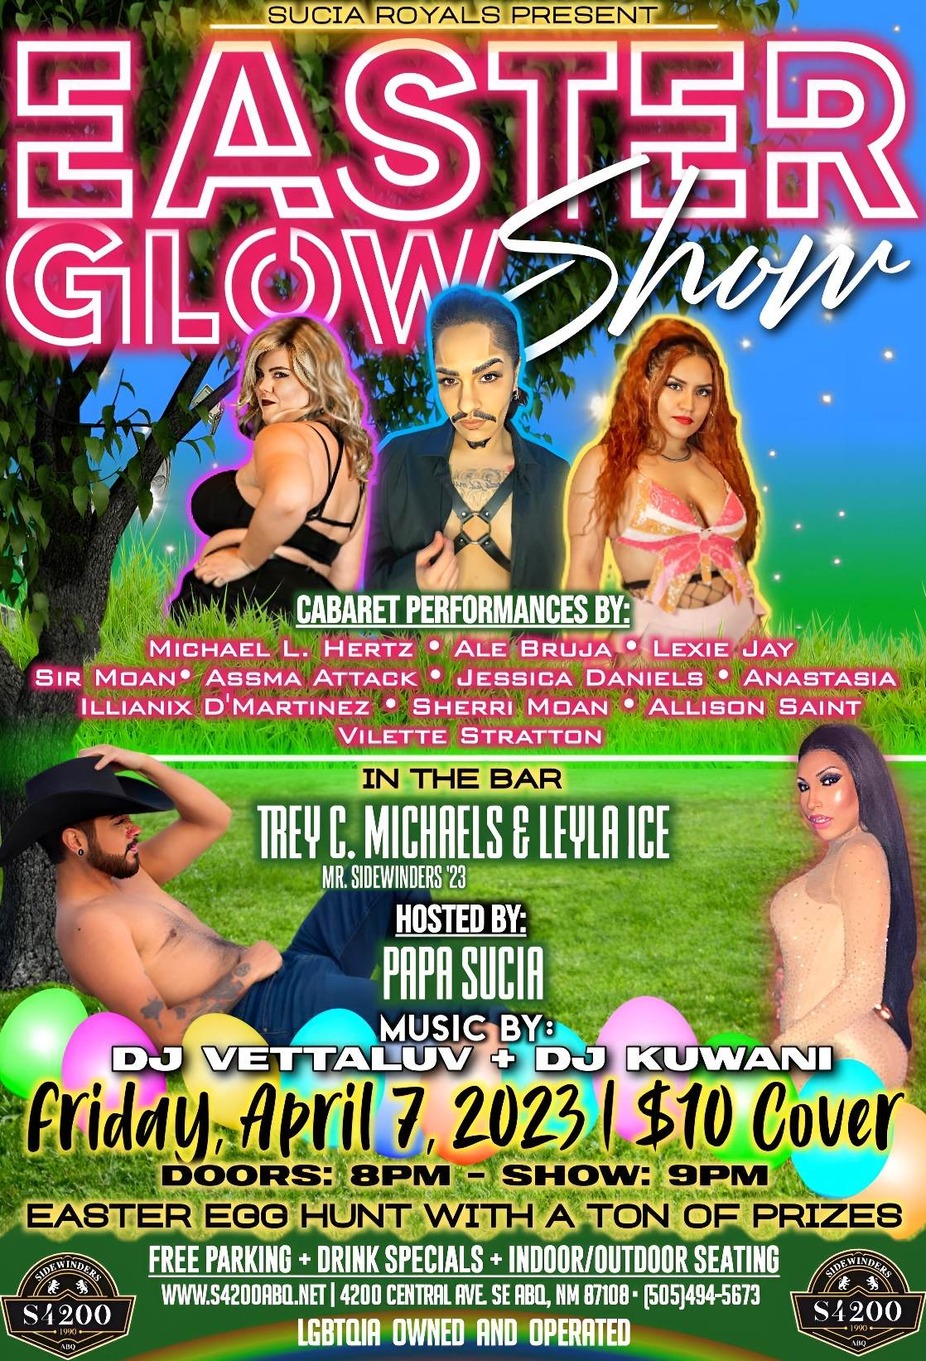 Easter Glow Show event photo